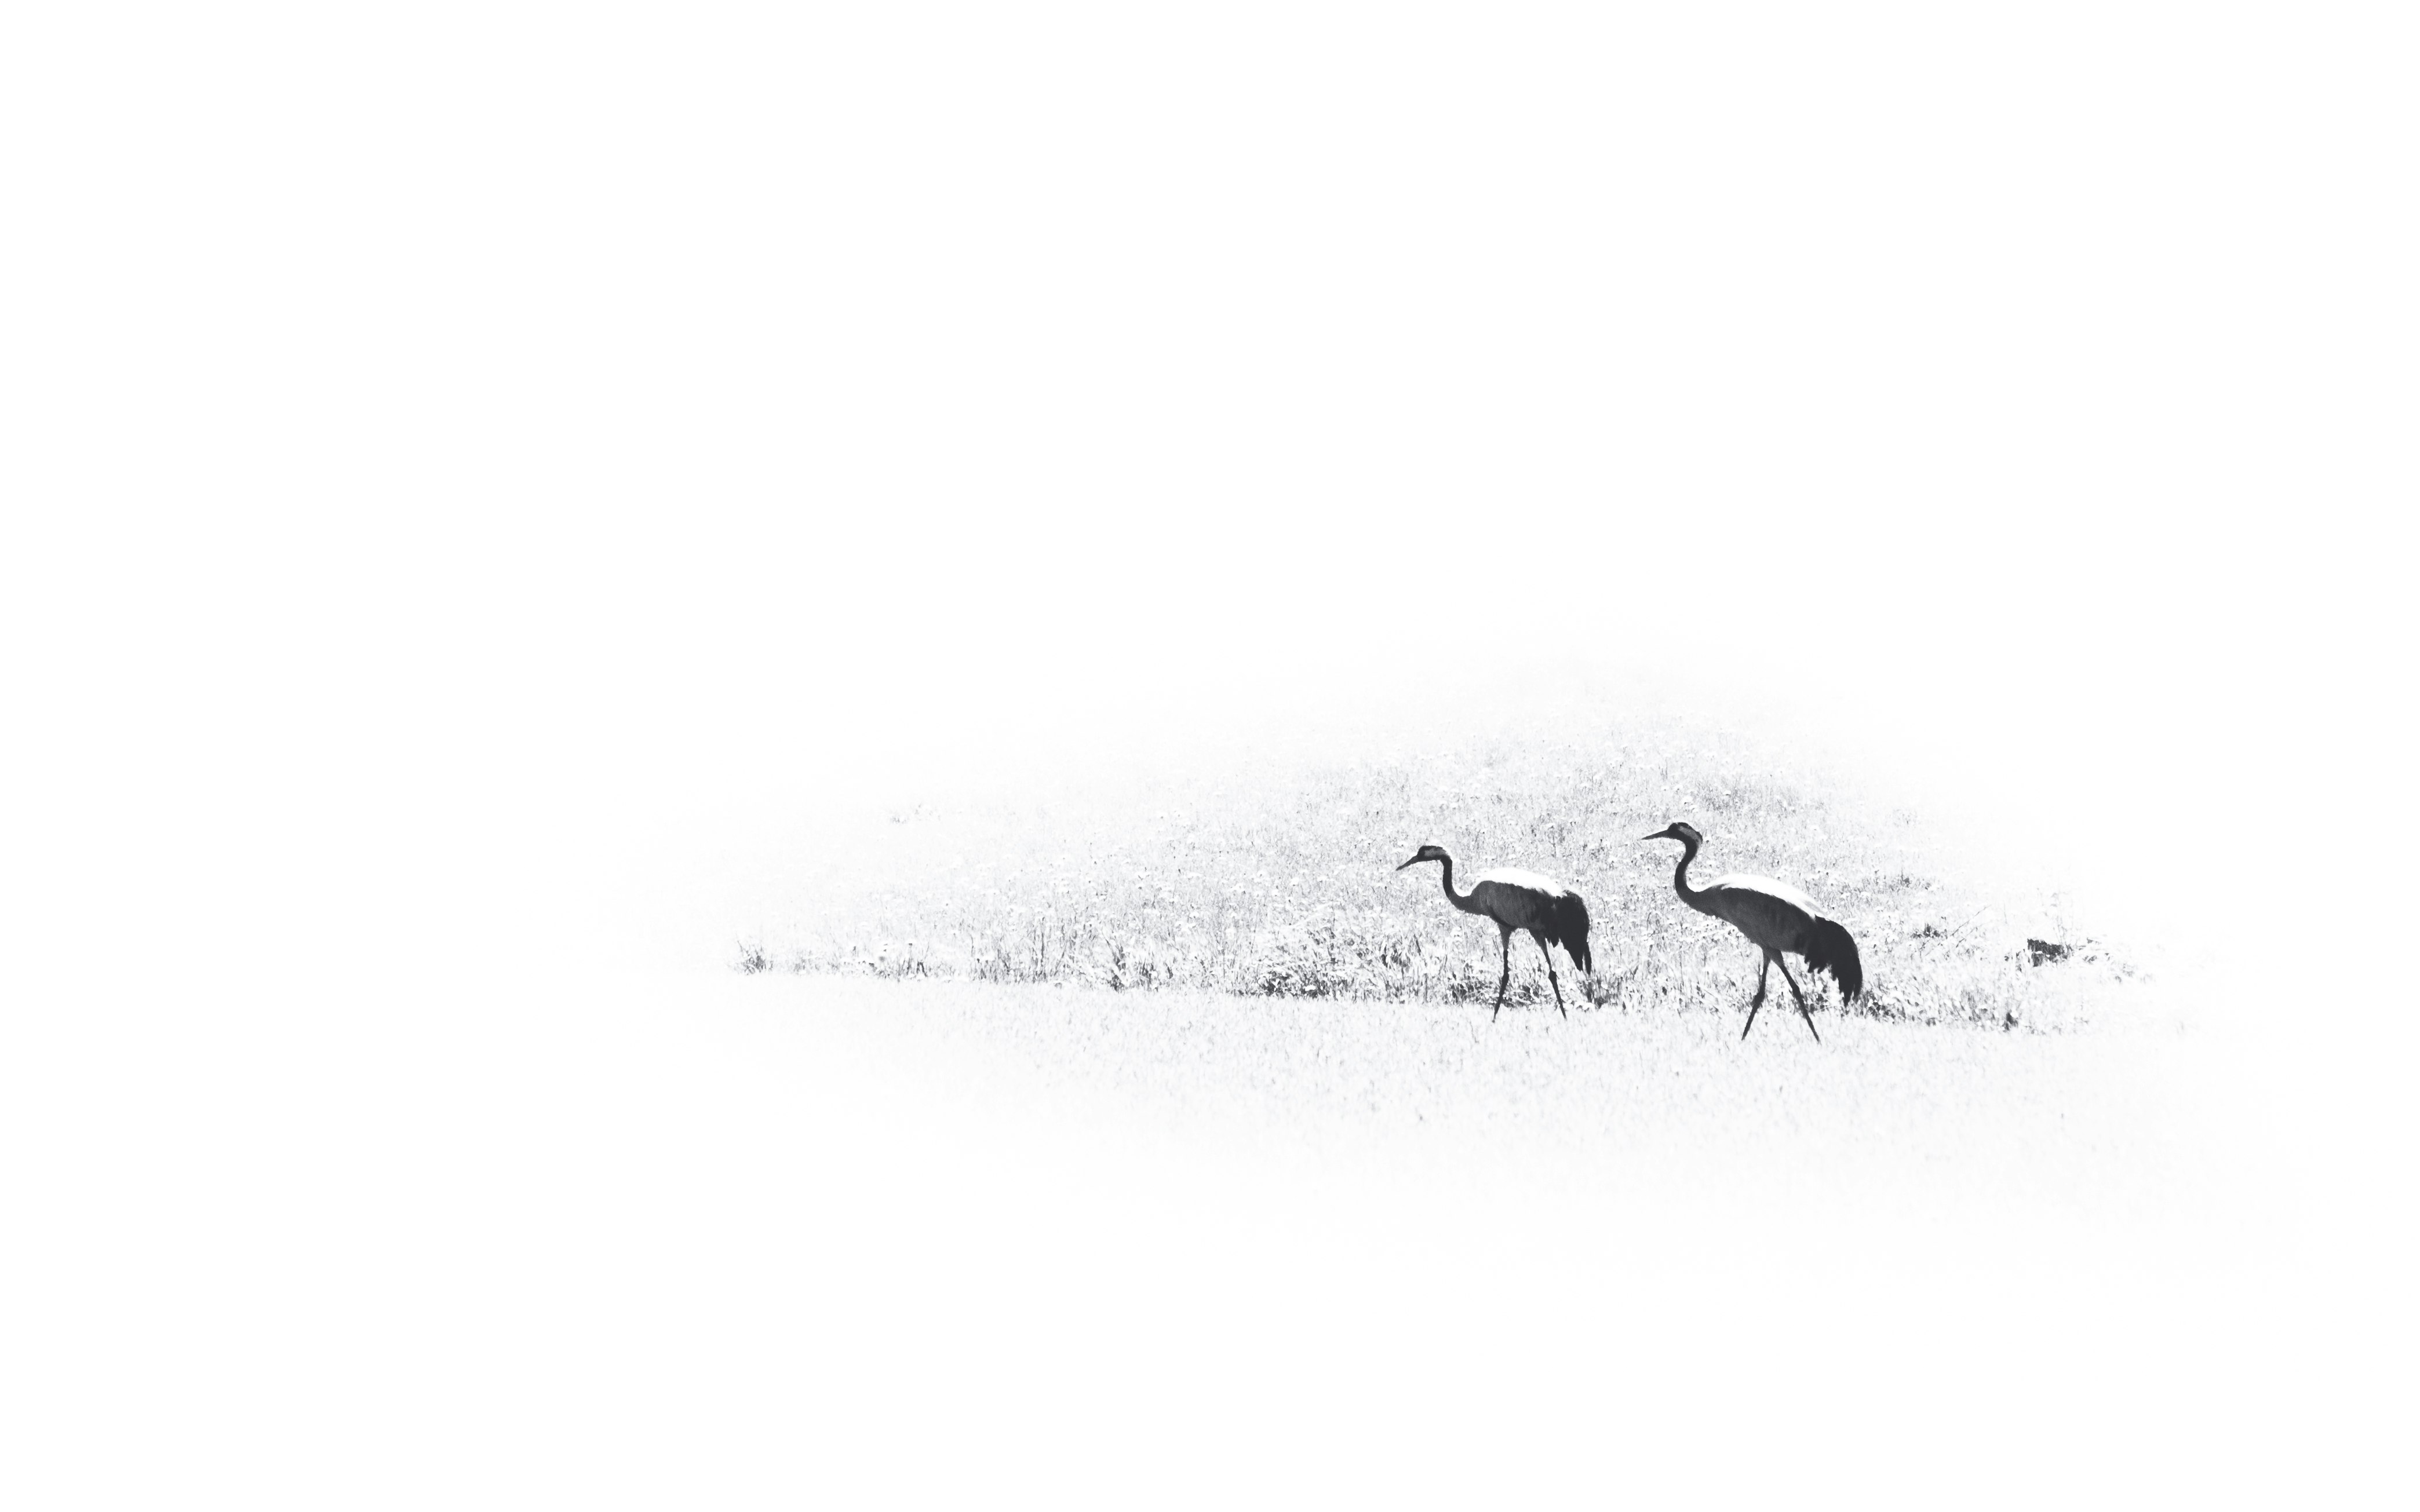 black and white animal walking on snow covered ground